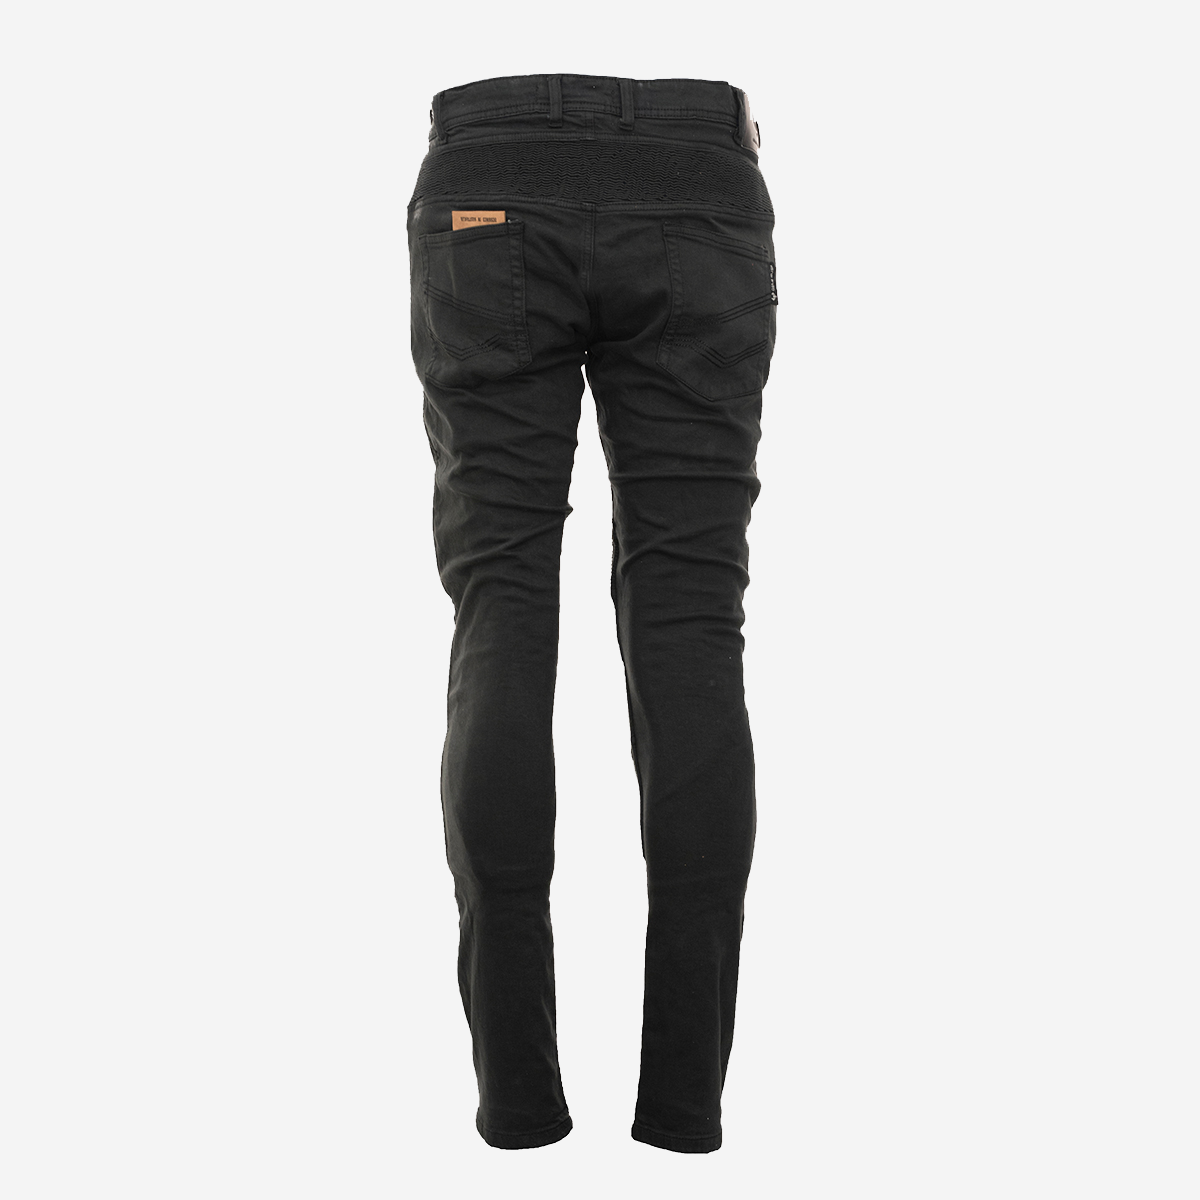 FALCON Men Motorcycle Safety Jeans